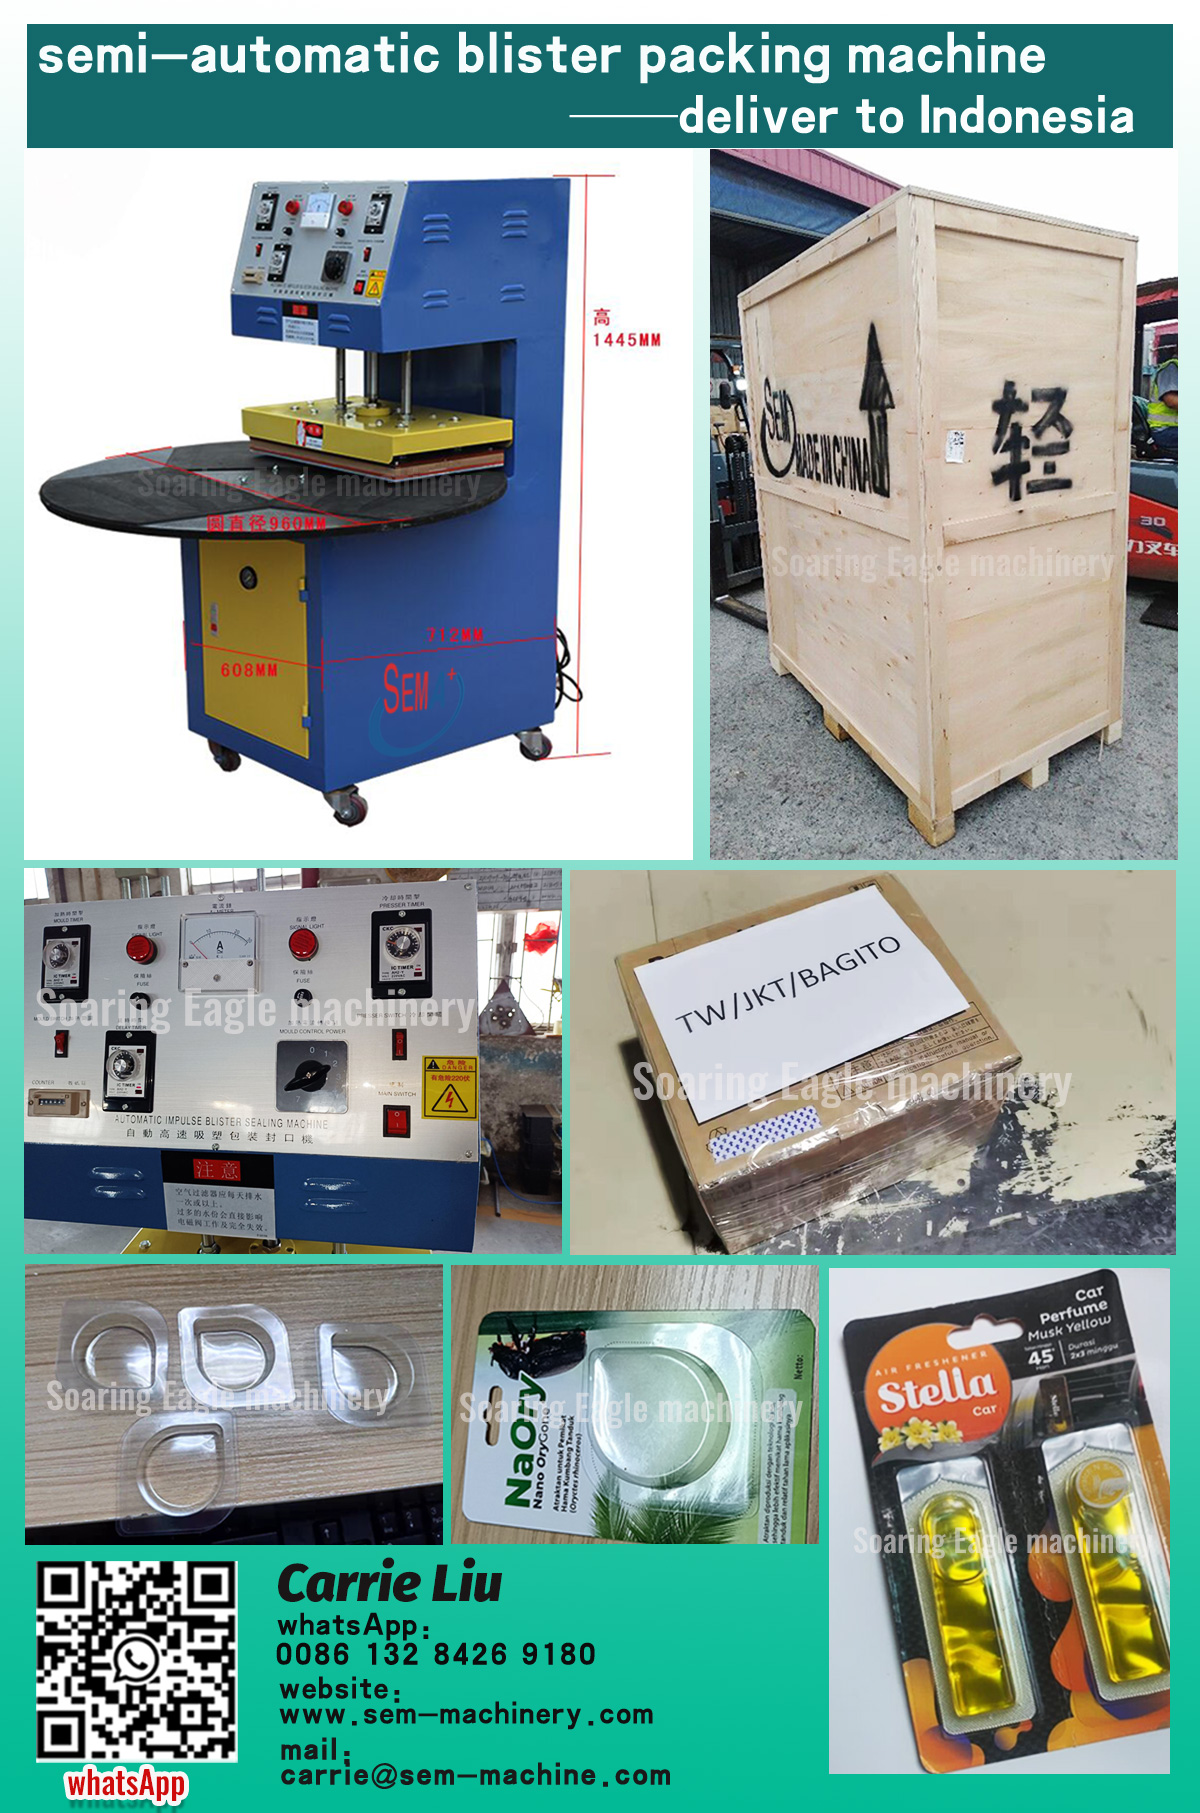 Semi-automatic blister packing machine——Deliver to Indonesia